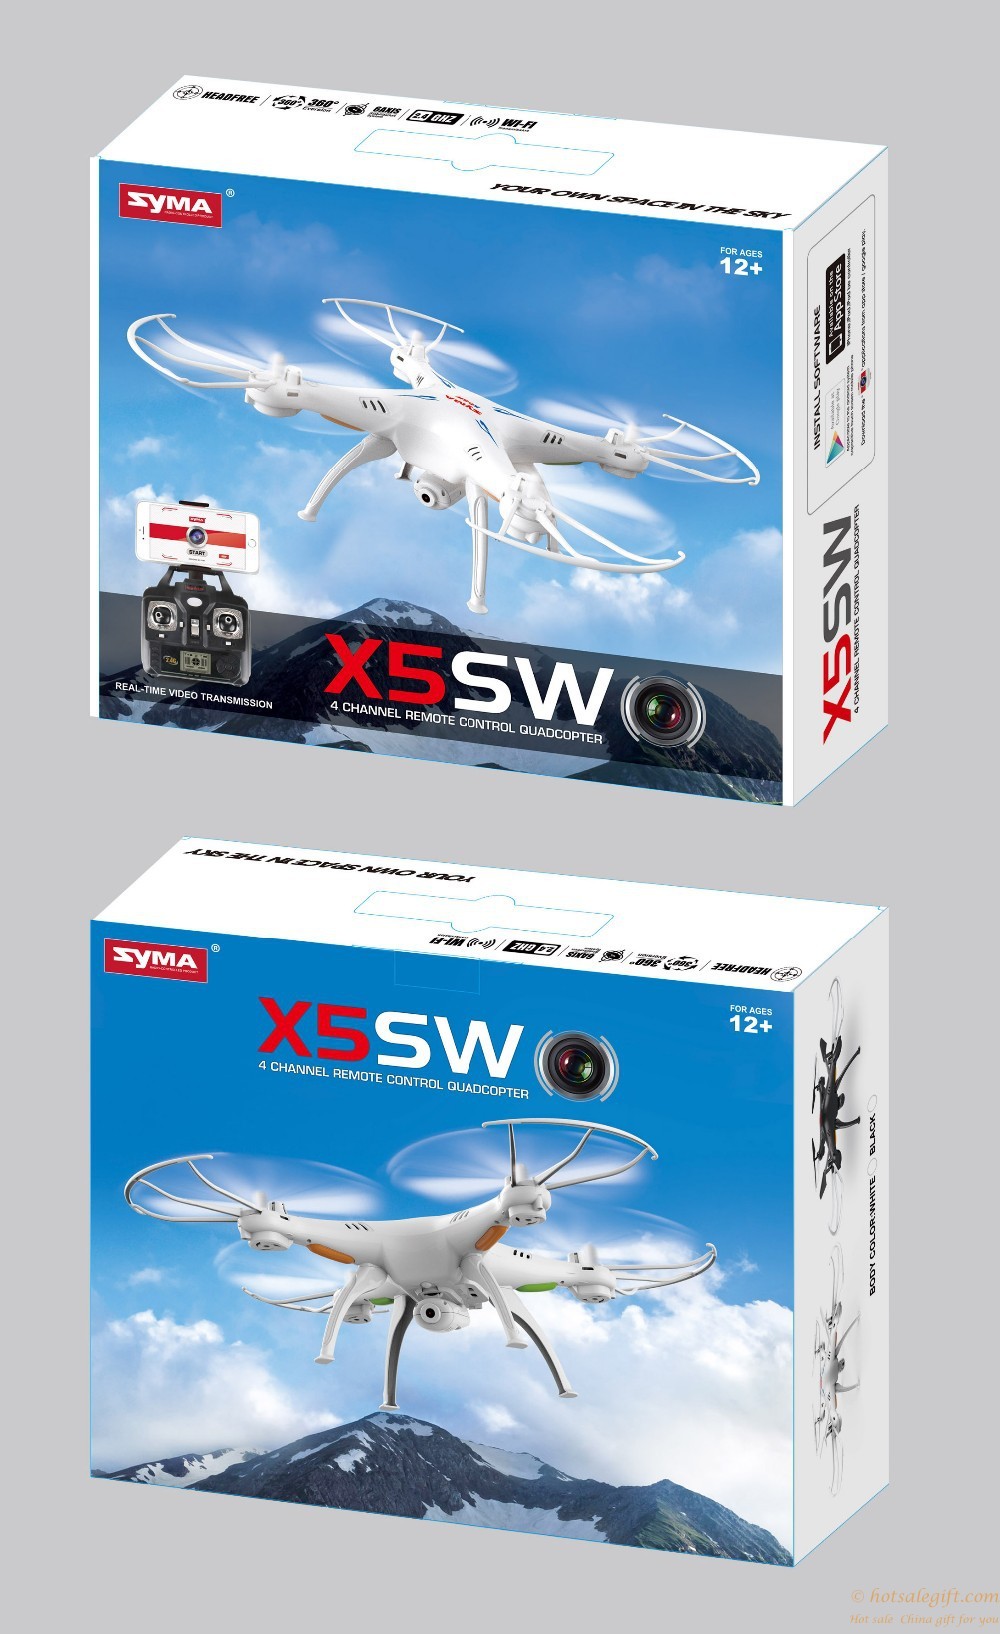 hotsalegift syma original x5sw drones quadcopter hd camera wifi rc drone fpv helicopter 24g 6axis real time rc helicopter toy 10